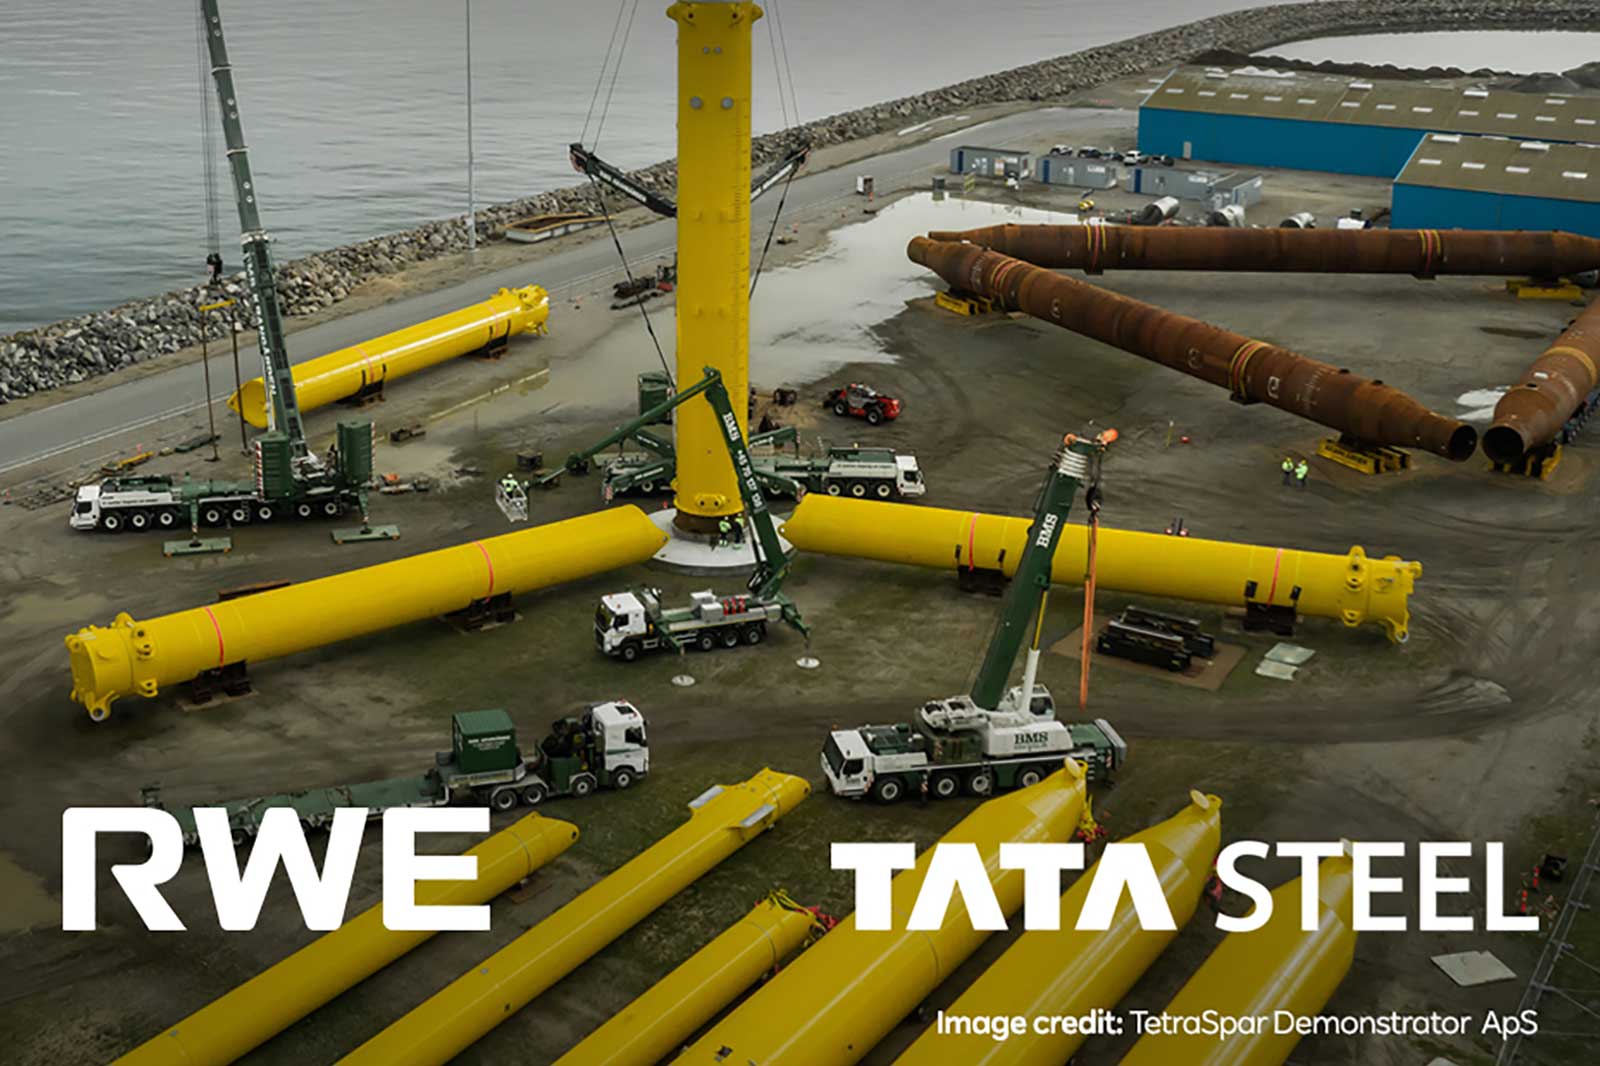 RWE and Tata Steel enter new partnership to support green industrial revolution and offshore wind power generation in Wales